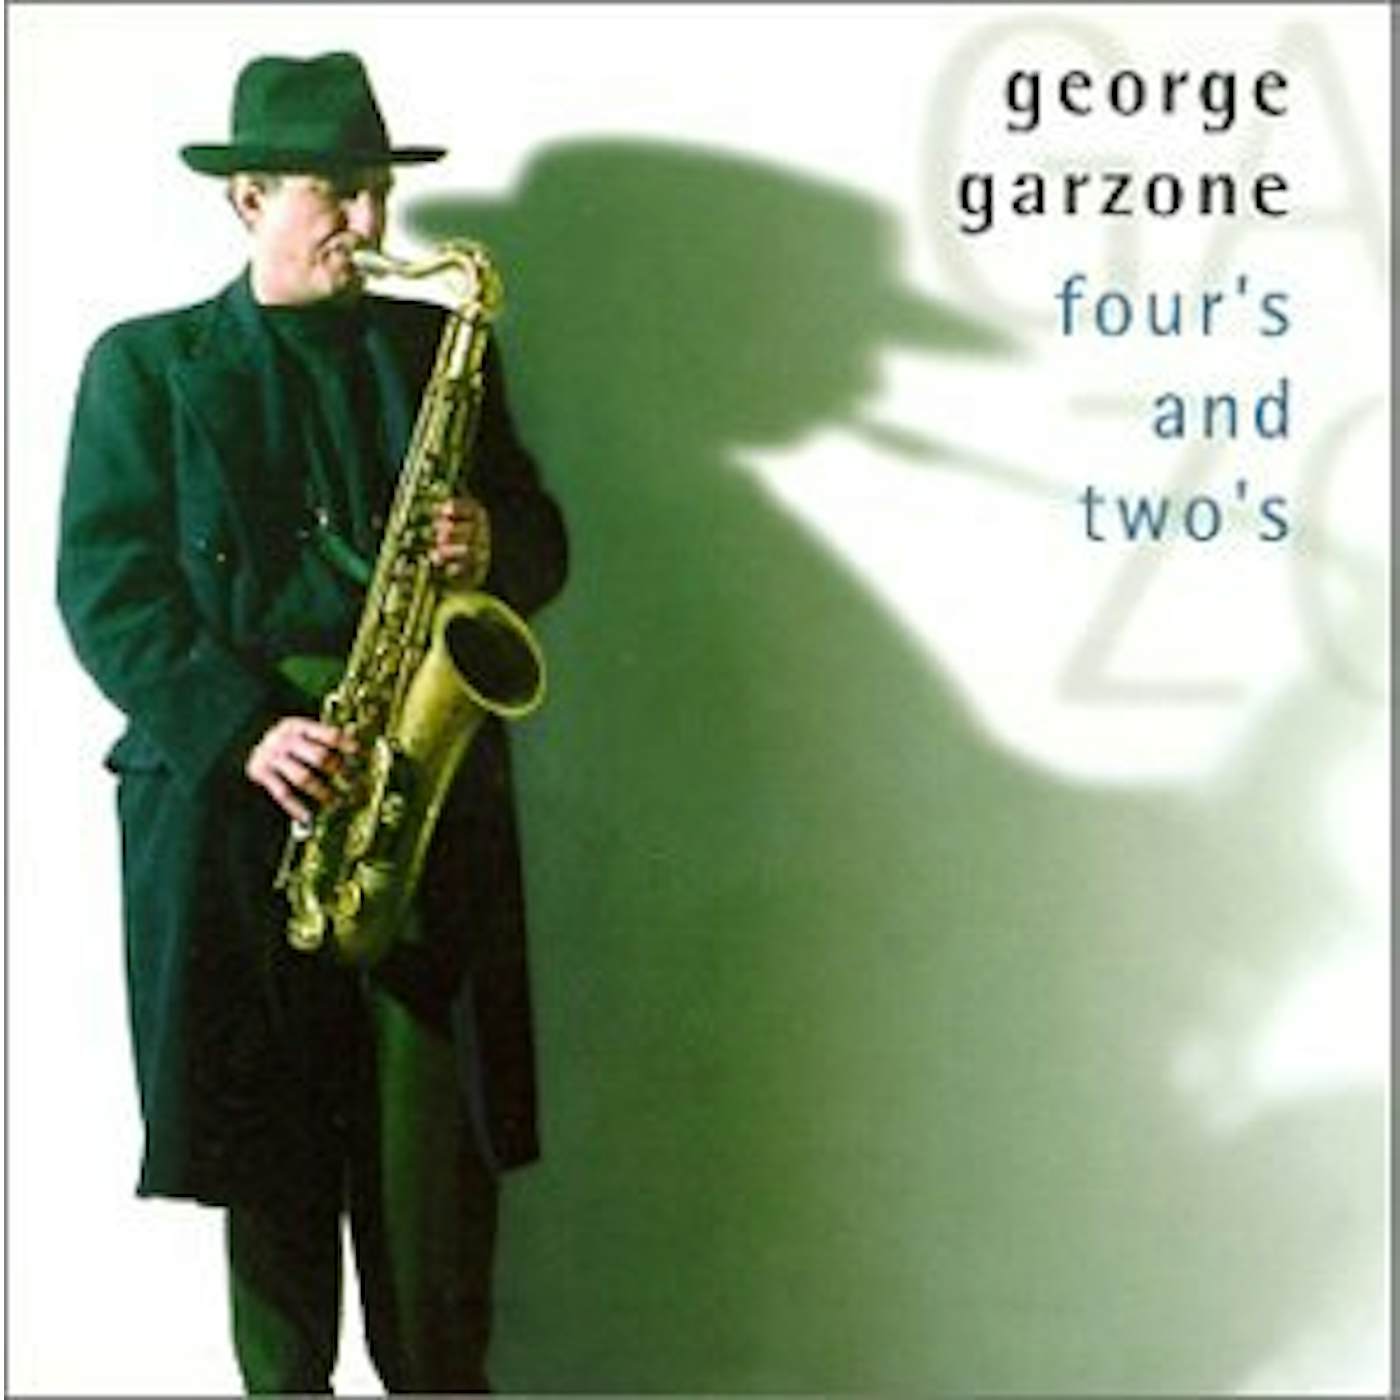 George Garzone FOUR & TWO'S CD